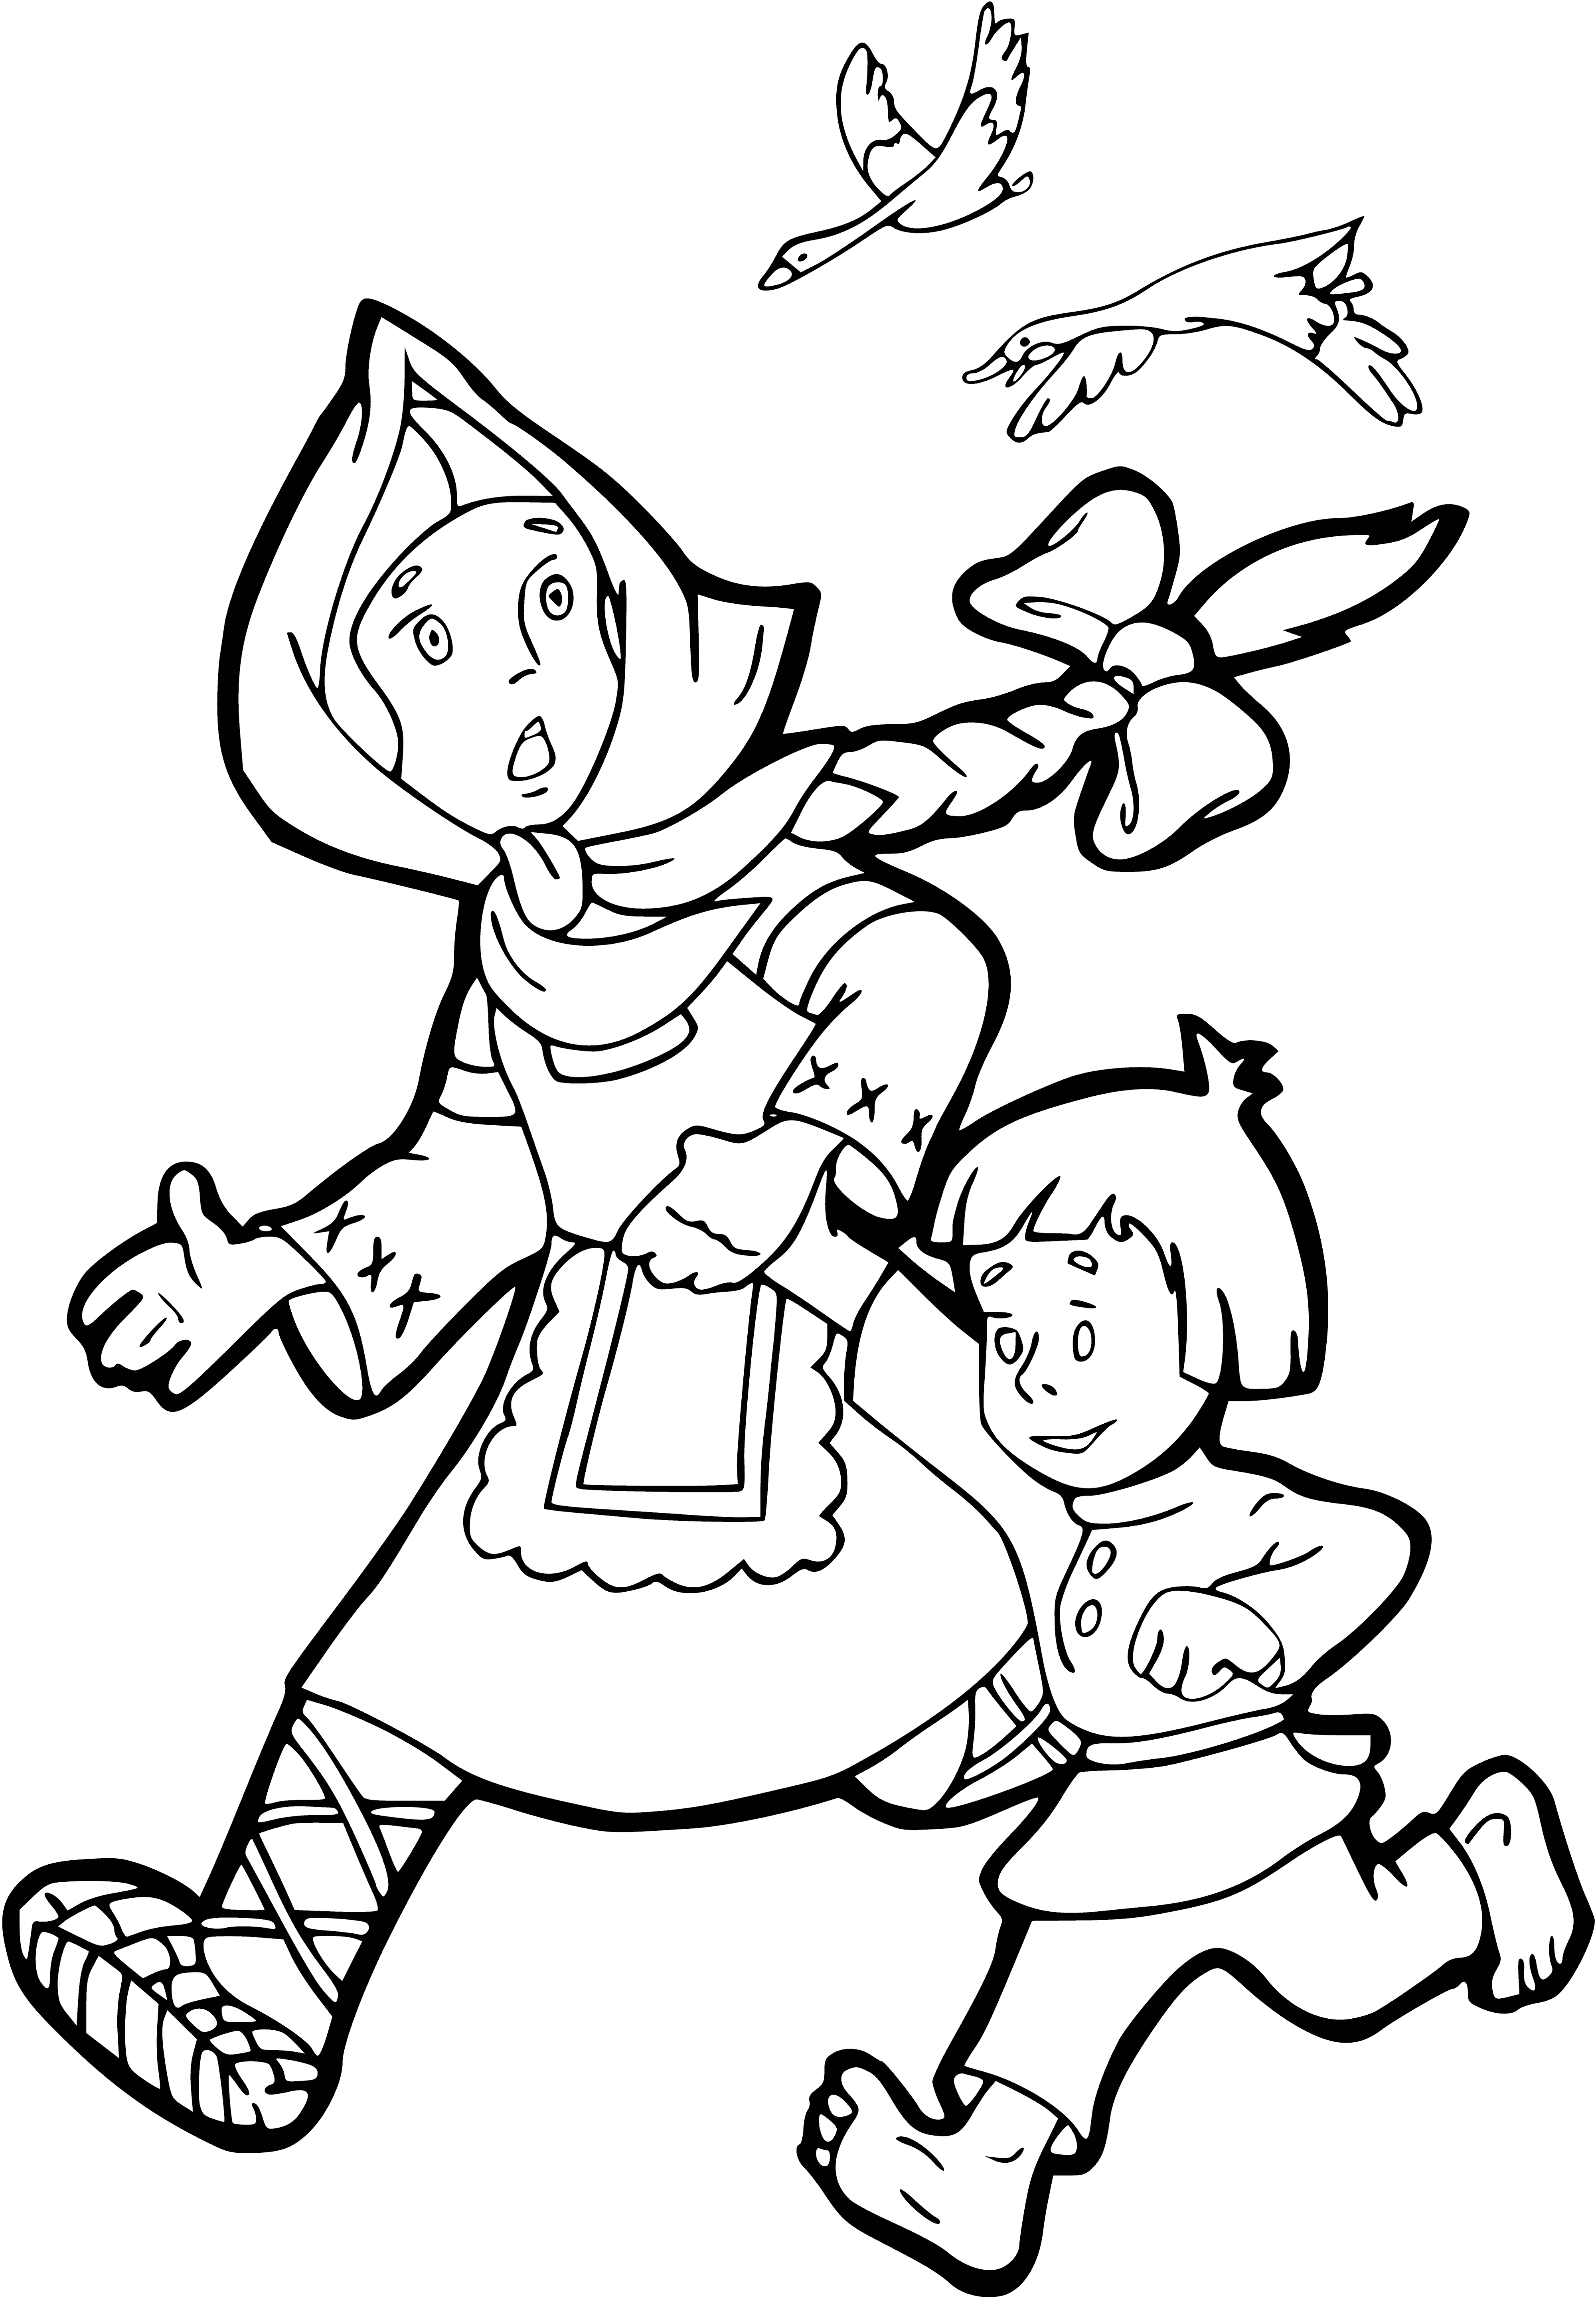 The children ran away coloring page